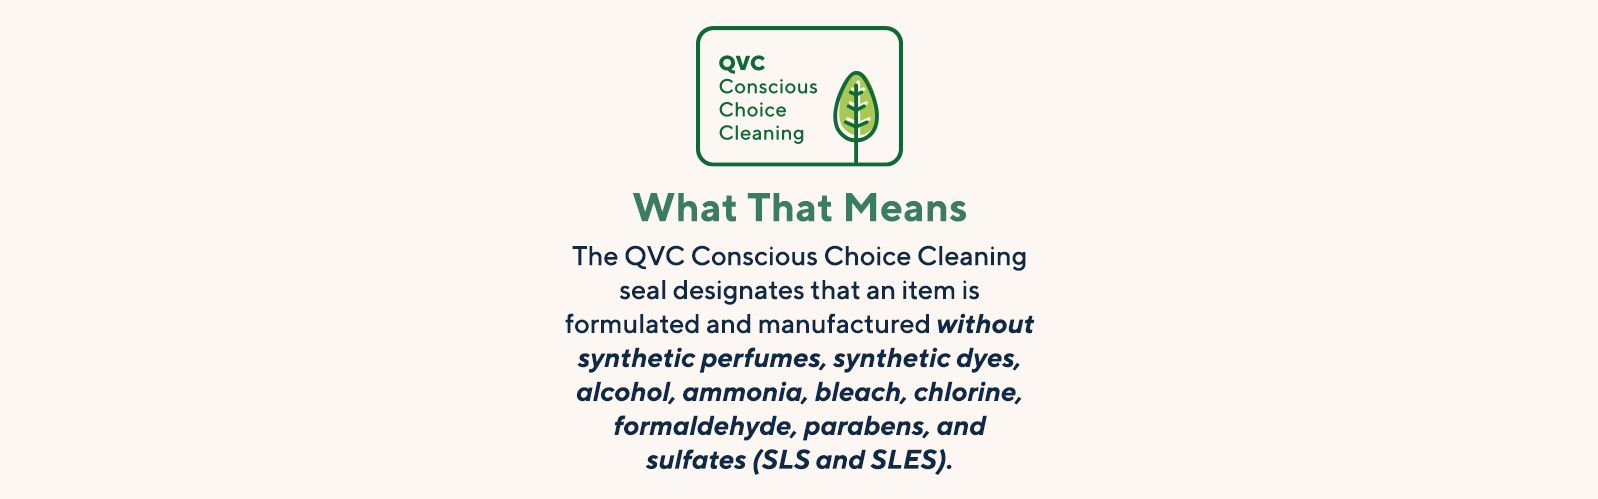 What That Means The QVC Conscious Choice Cleaning seal designates that an item is formulated and manufactured without synthetic perfumes, synthetic dyes, alcohol, ammonia, bleach, chlorine, formaldehyde, parabens, and sulfates (SLS and SLES).